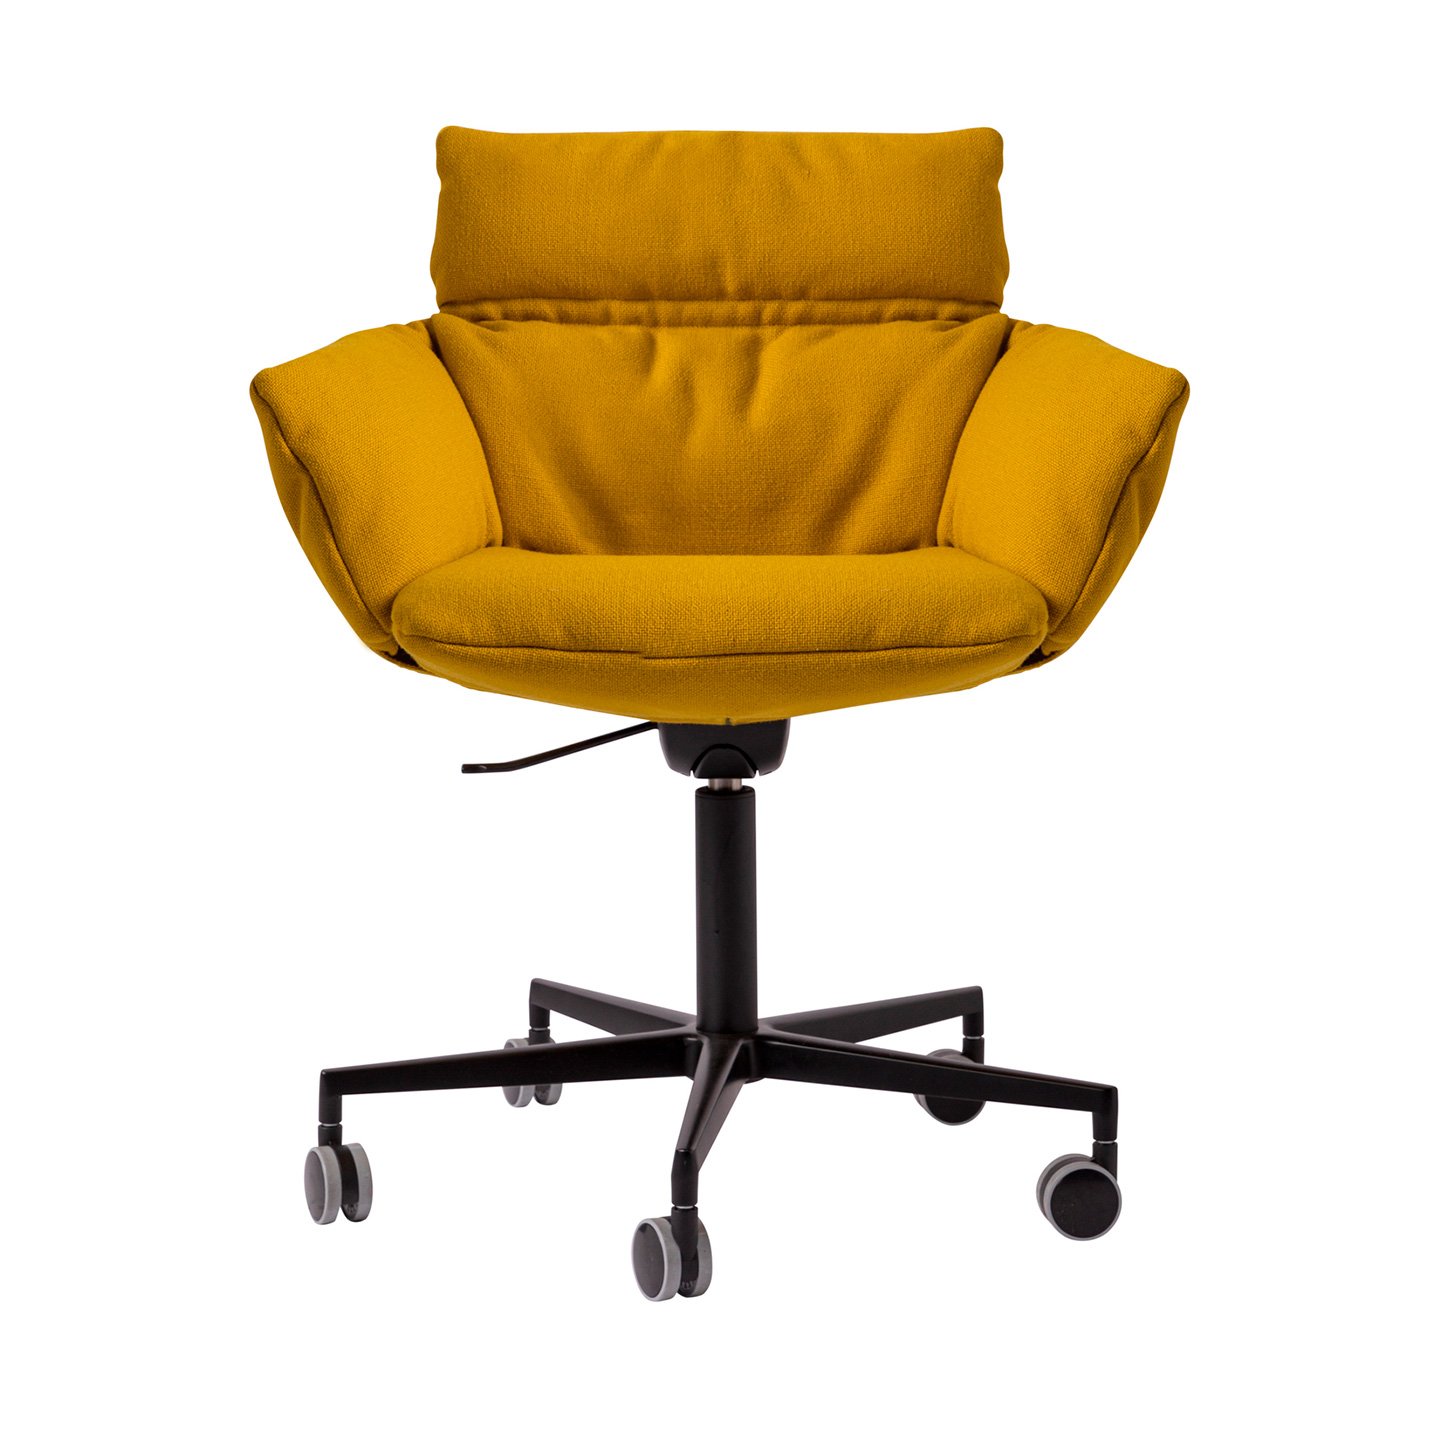 Lud'ina is a chair designed for the office, the home office or even the dining room.